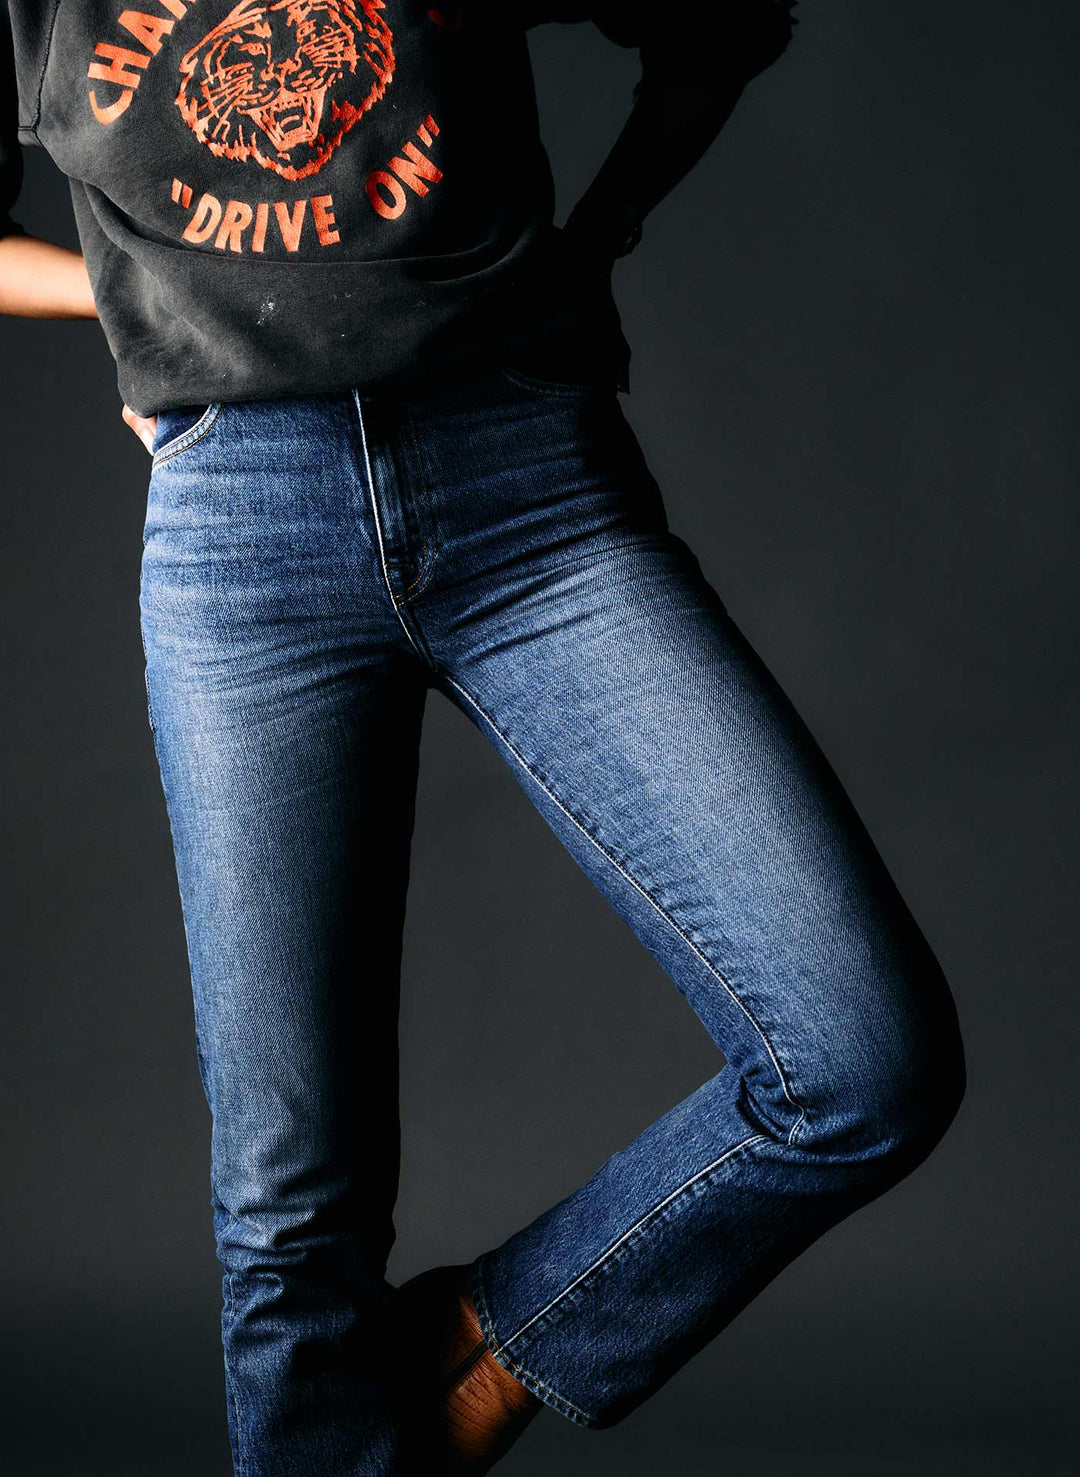 a person wearing blue jeans and black shoes